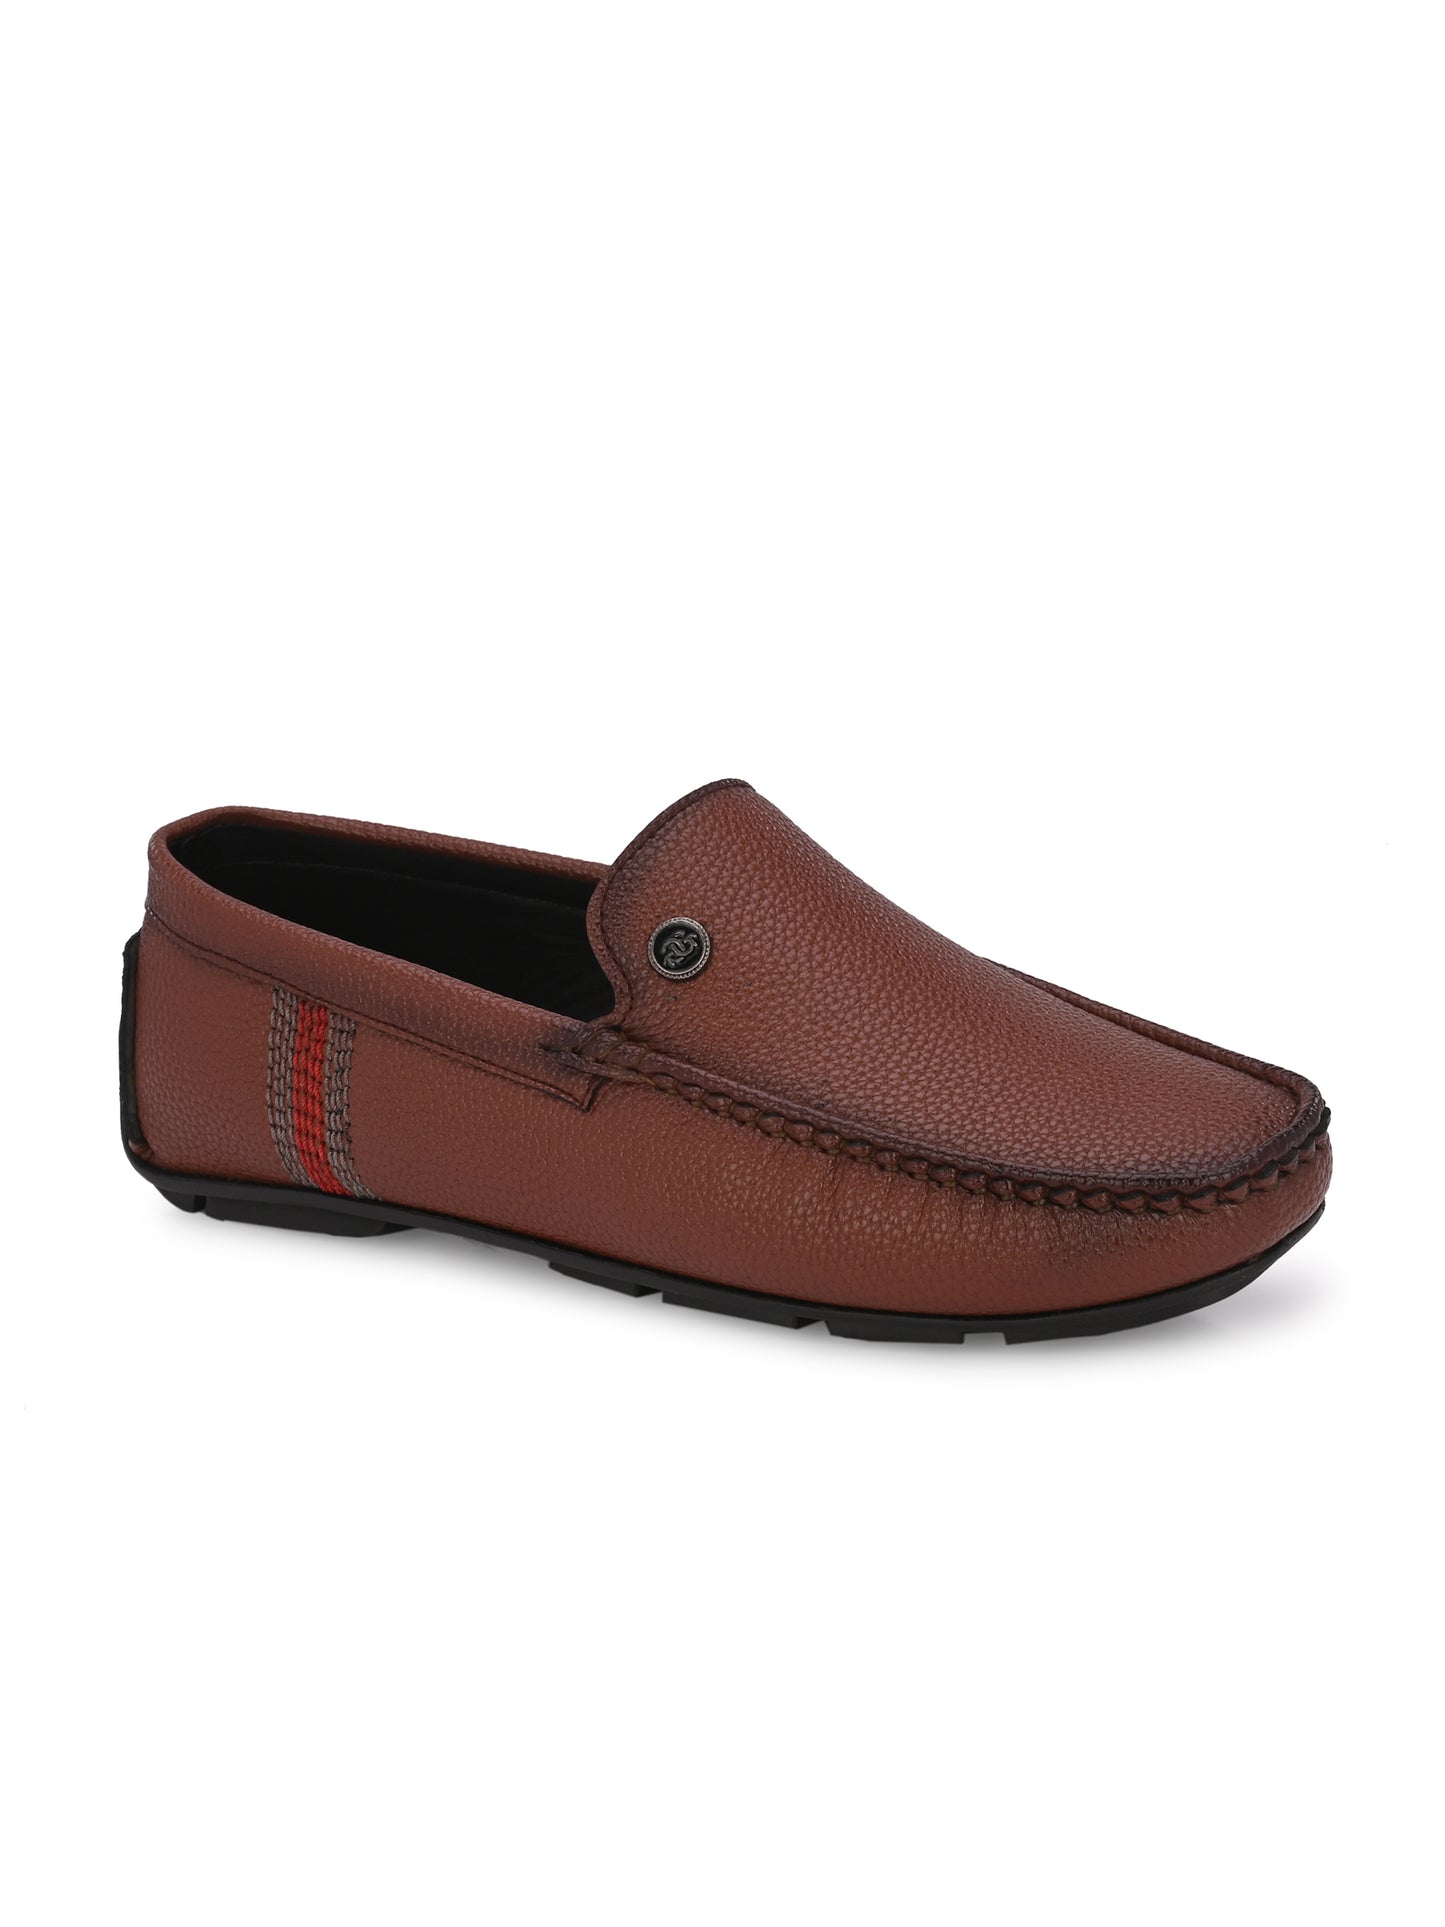 Guava Men's Tan Casual Slip On Driving Loafers (GV15JA834)